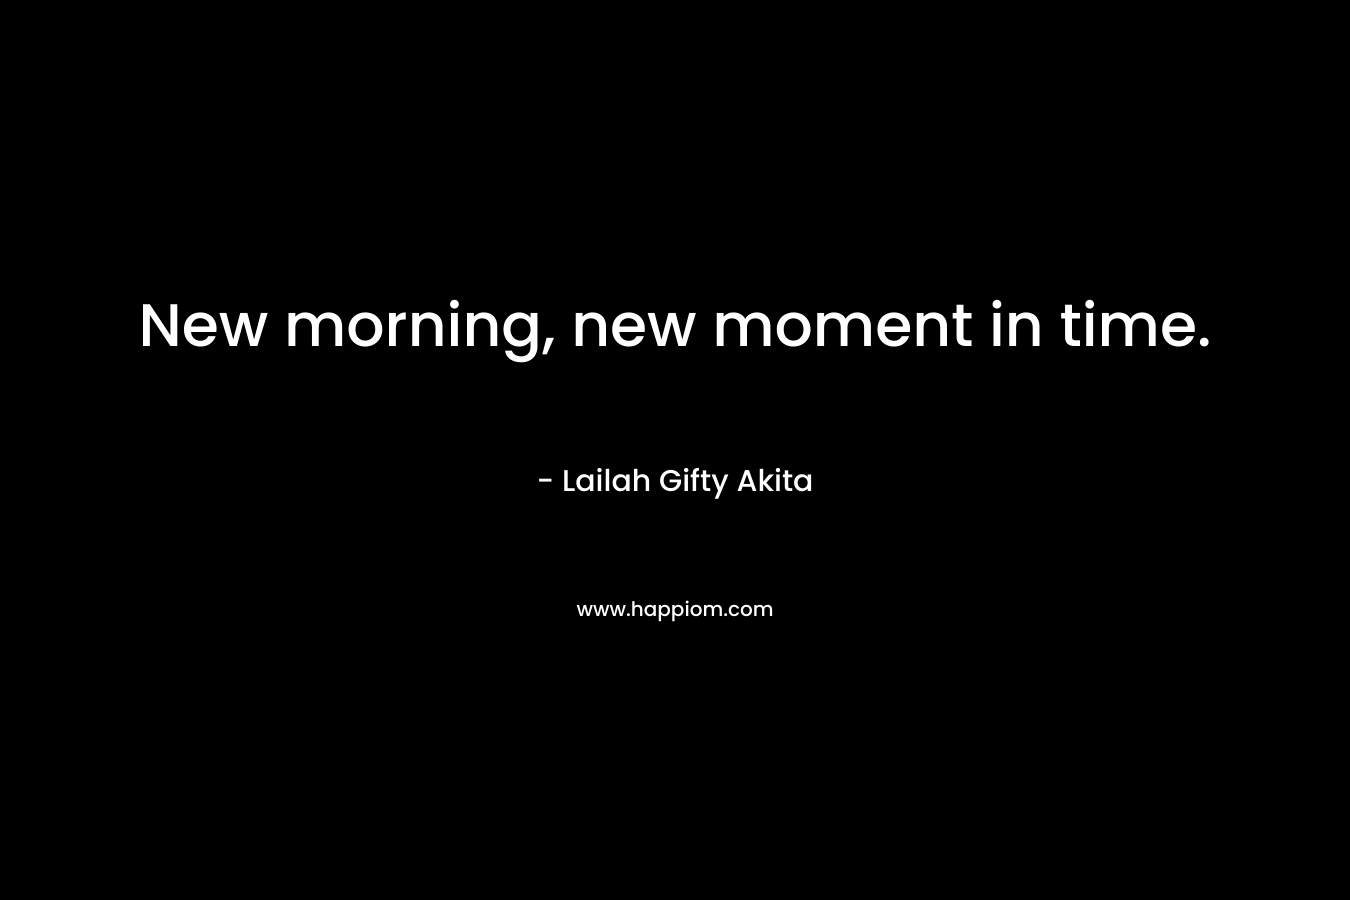 New morning, new moment in time.